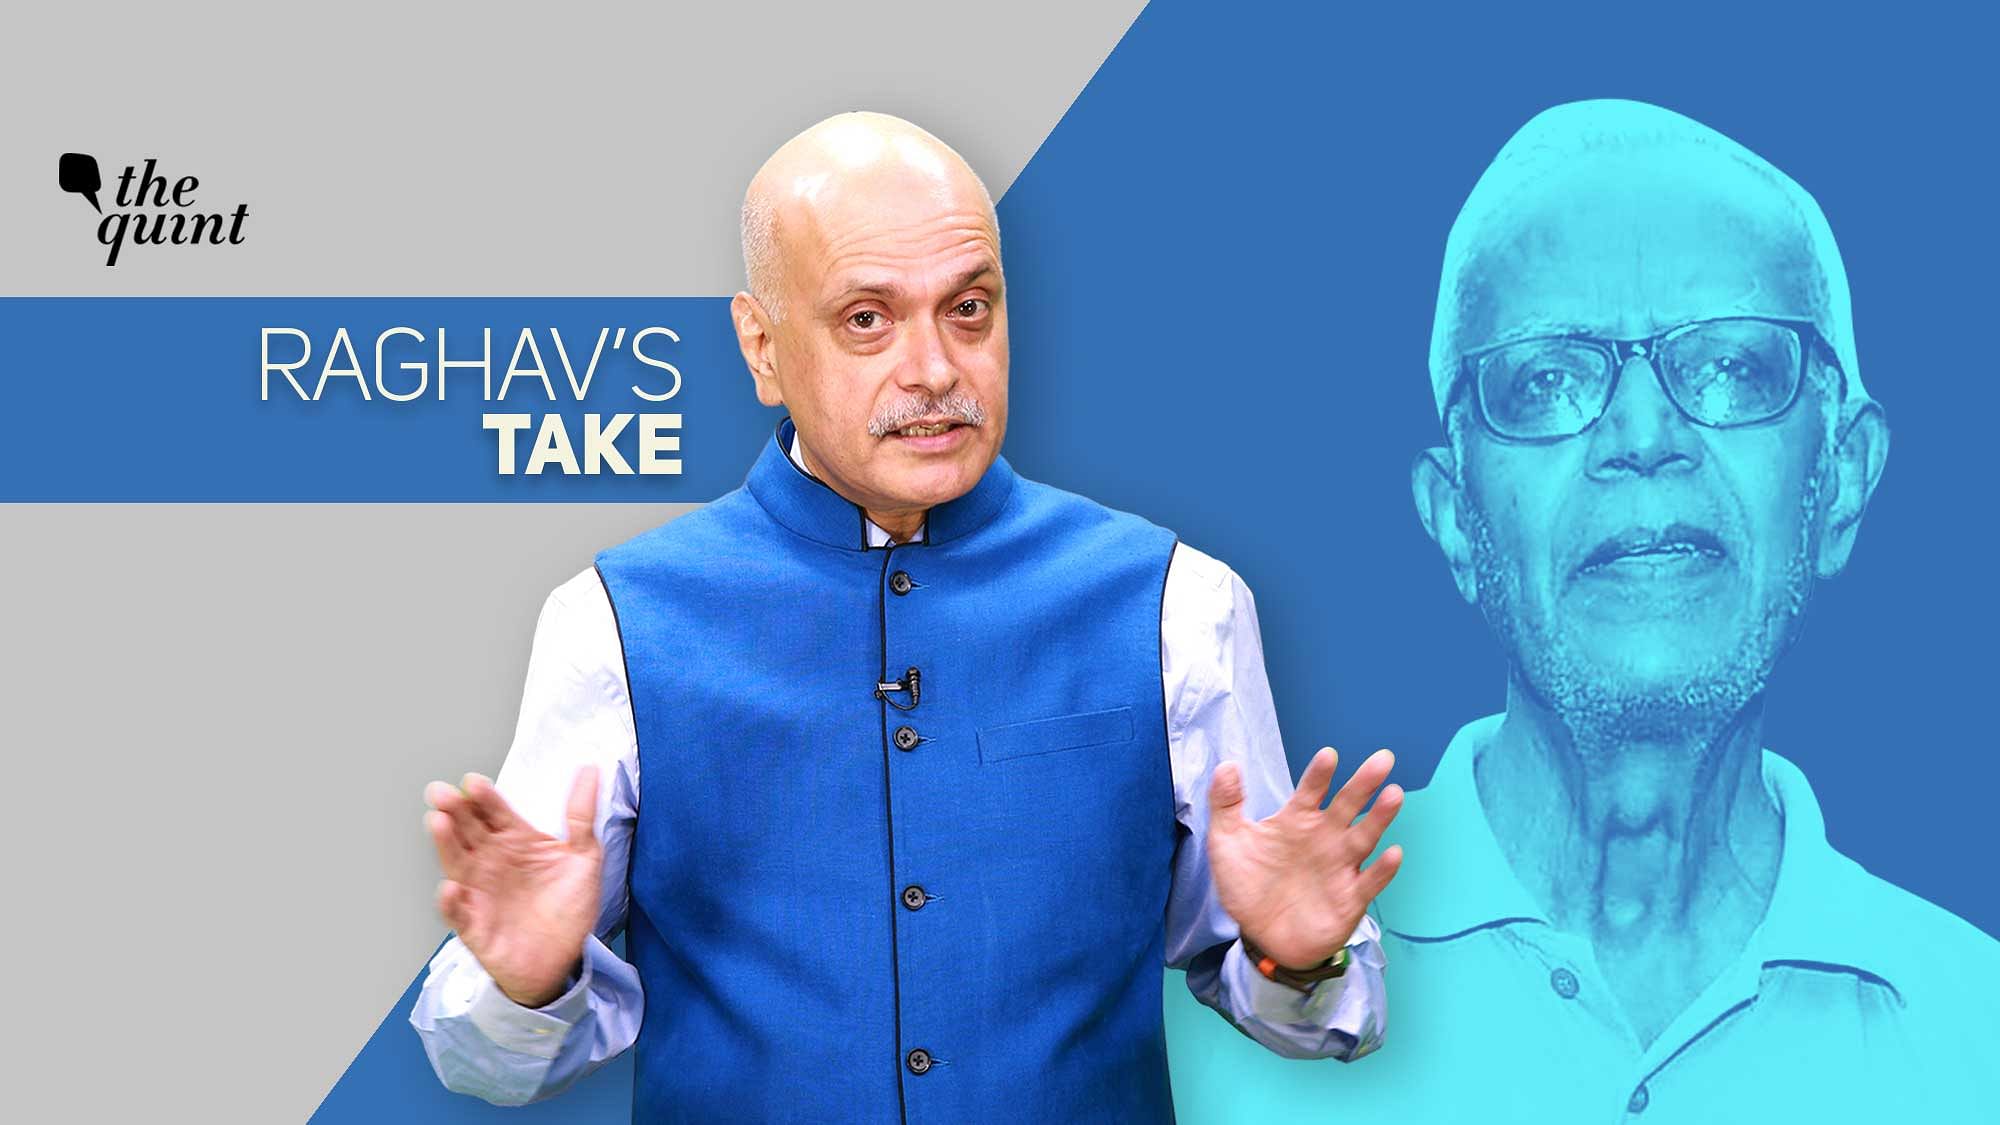 <div class="paragraphs"><p>The Quint's Editor-in-Chief Raghav Bahl shares his views on some recent  developments.</p></div>